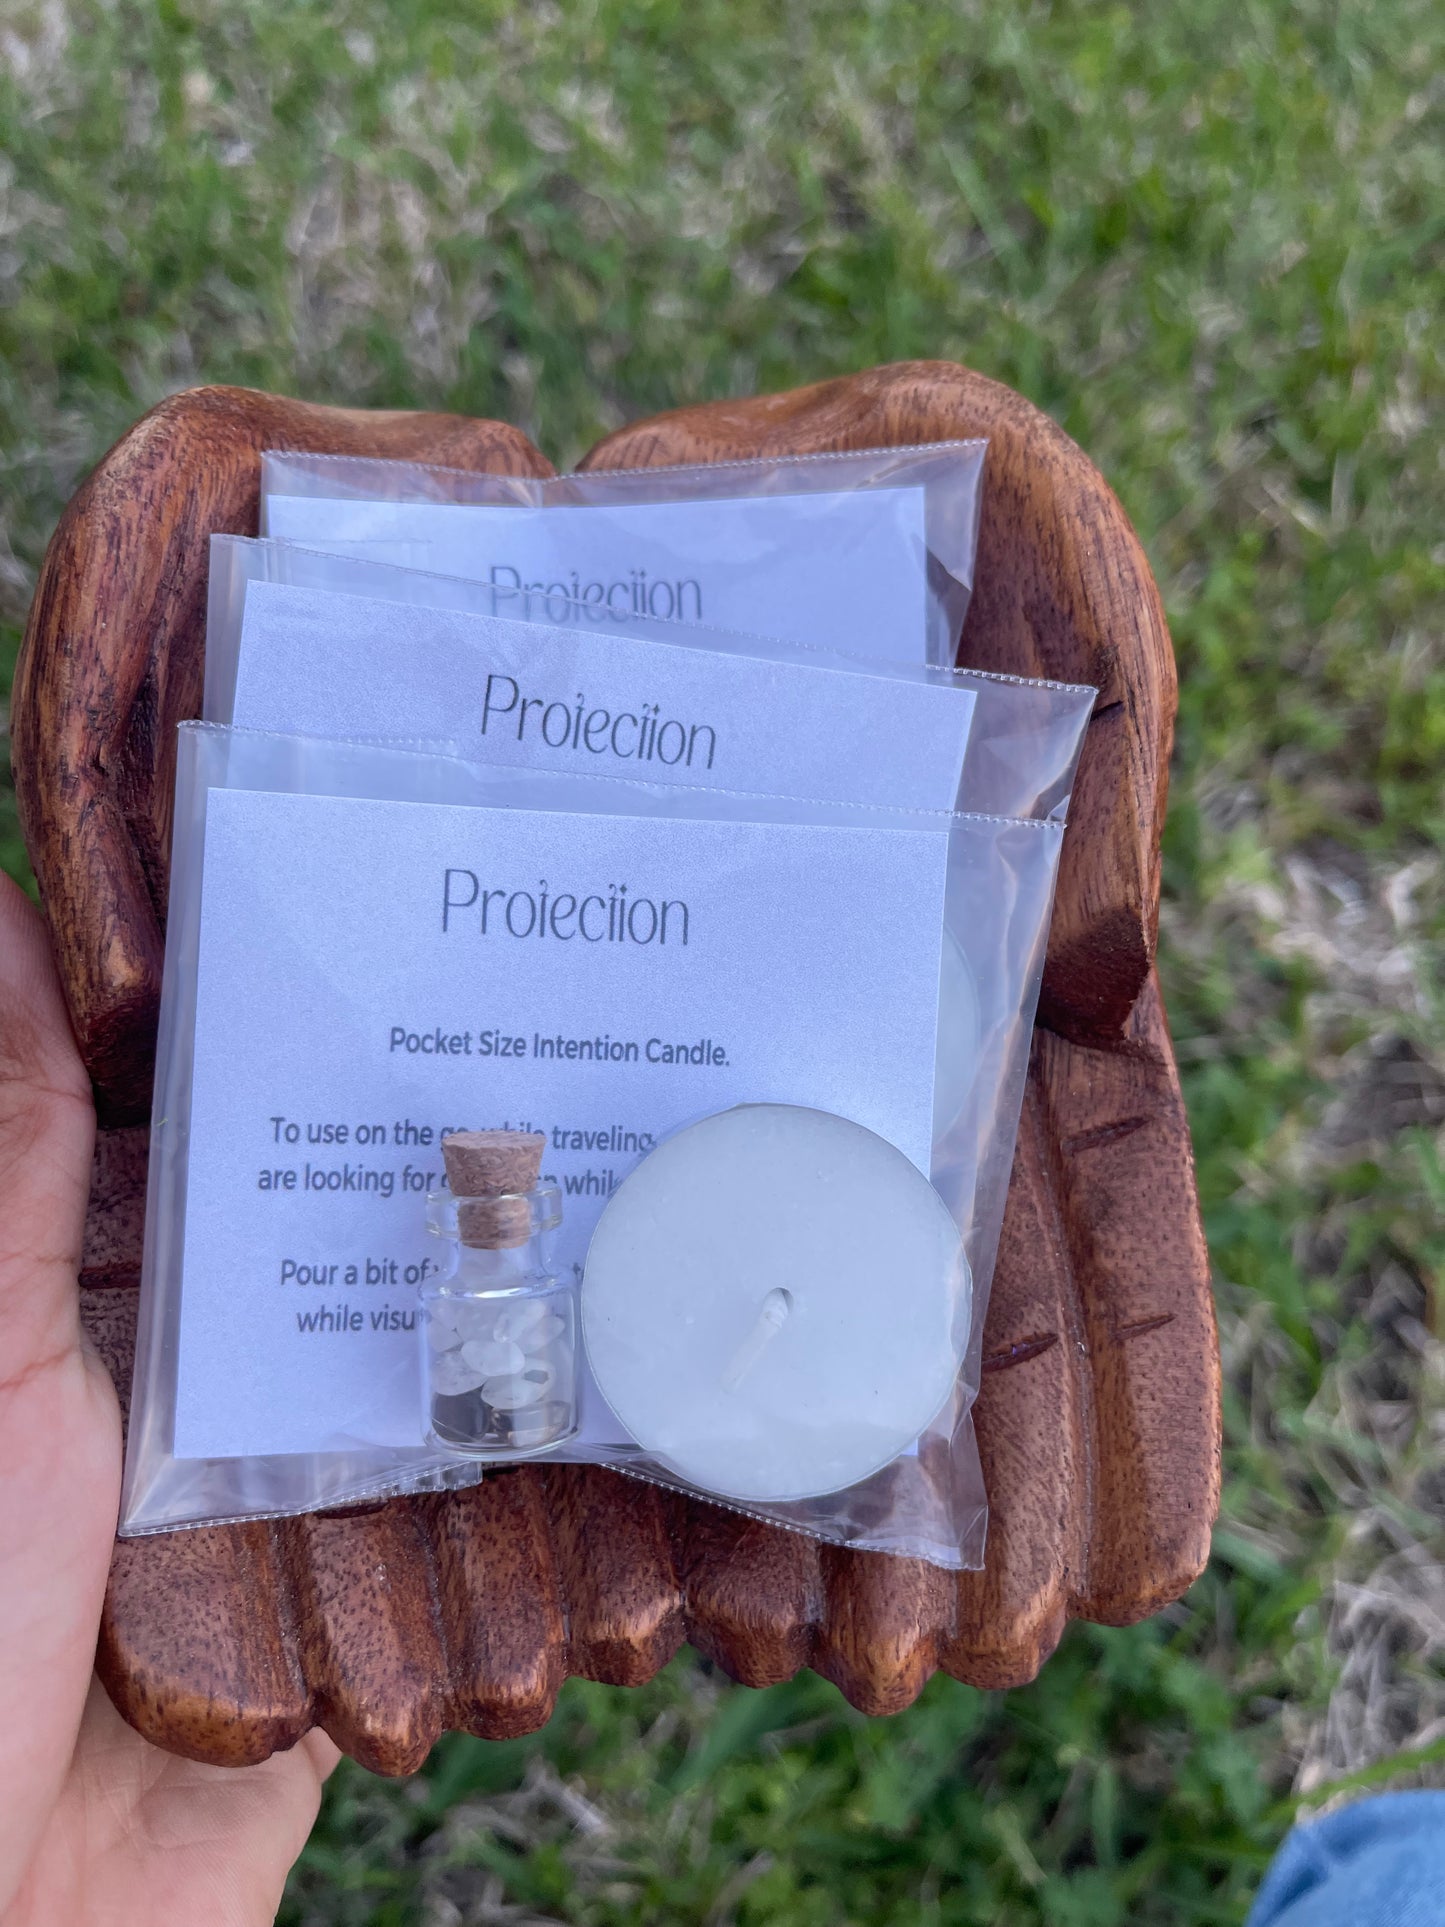 Pocket Size Intention Candle